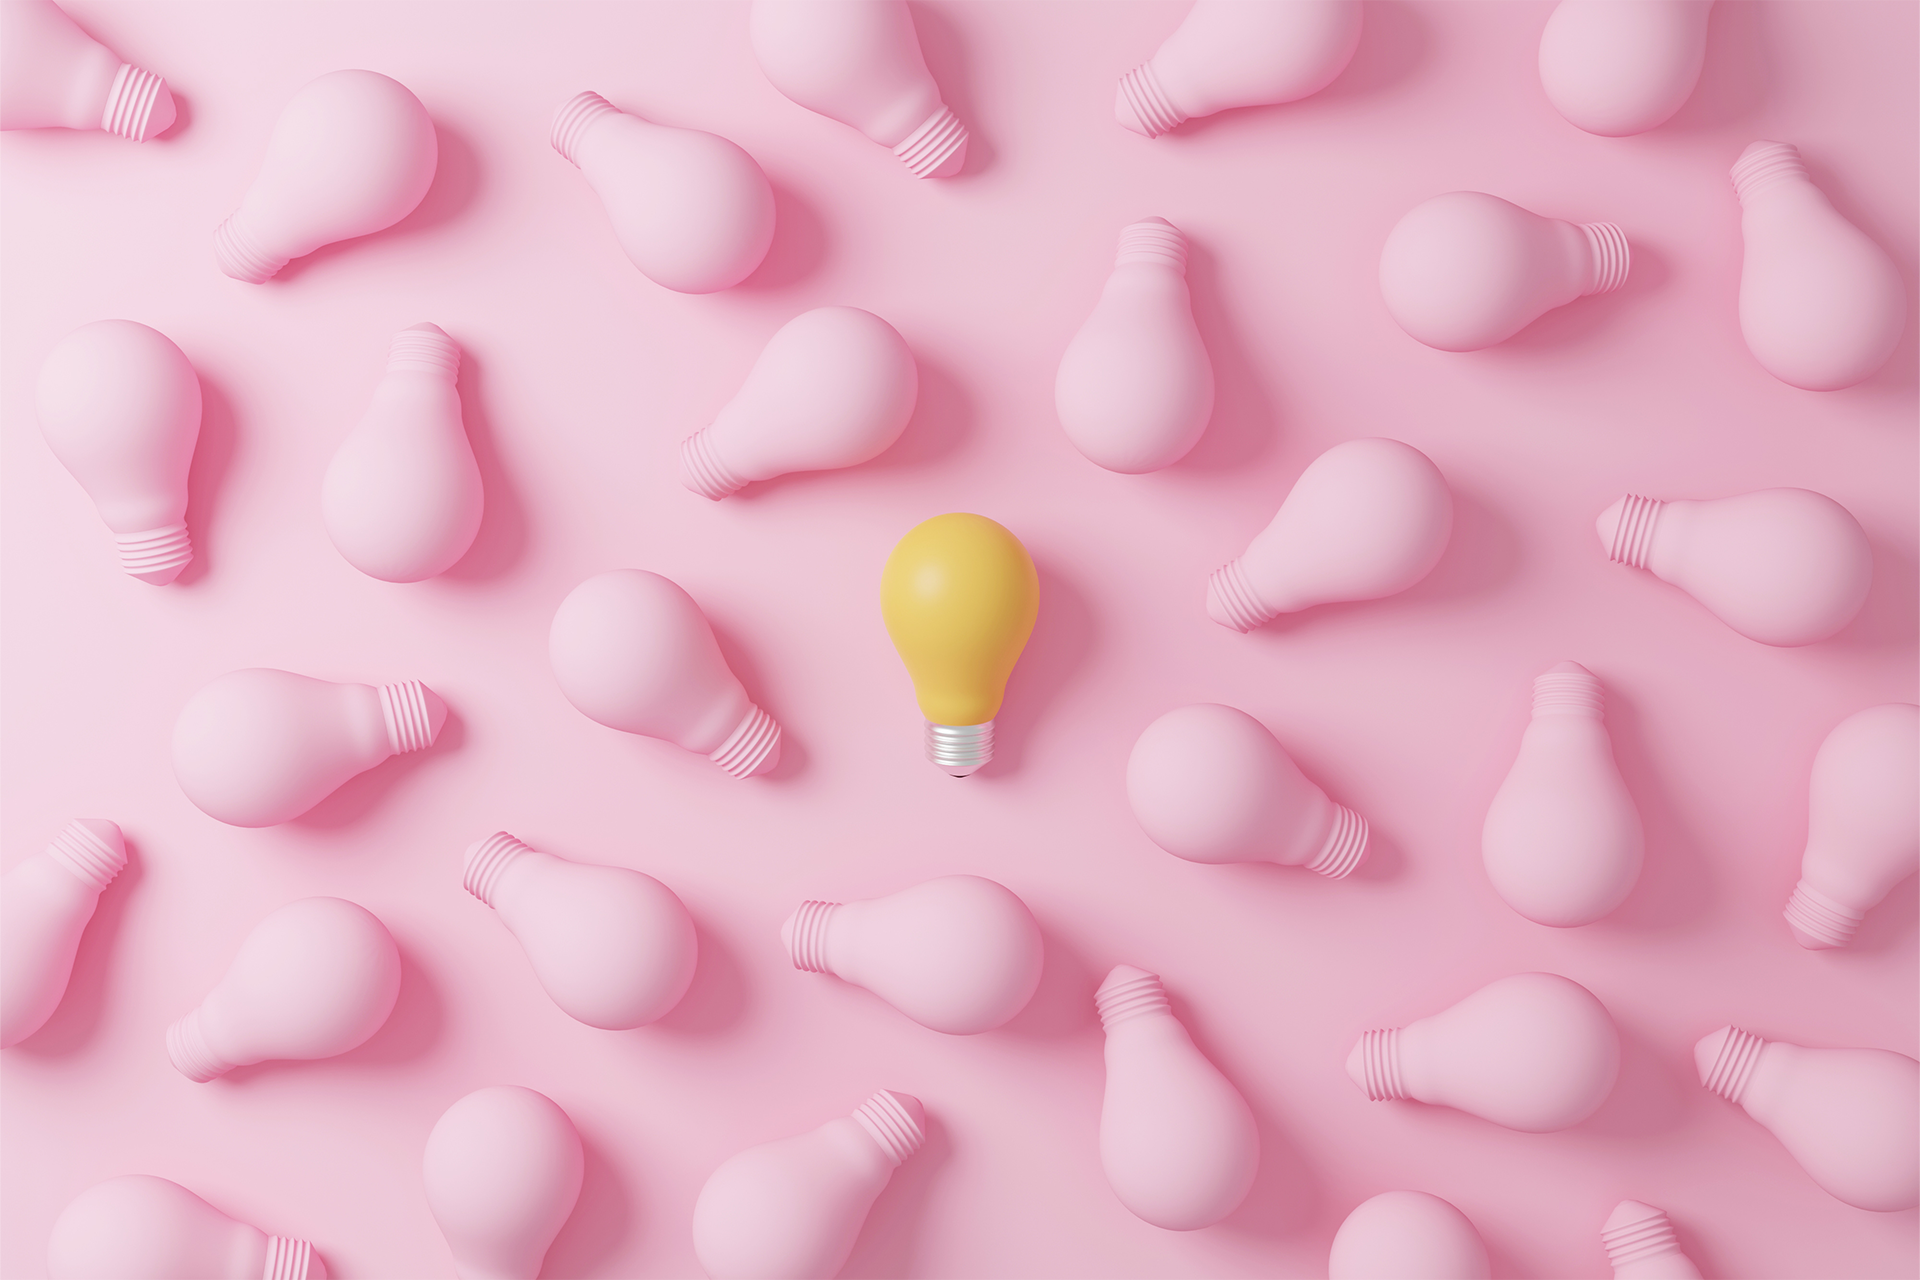 Yellow lightbulb in the middle of several pink lightbulbs